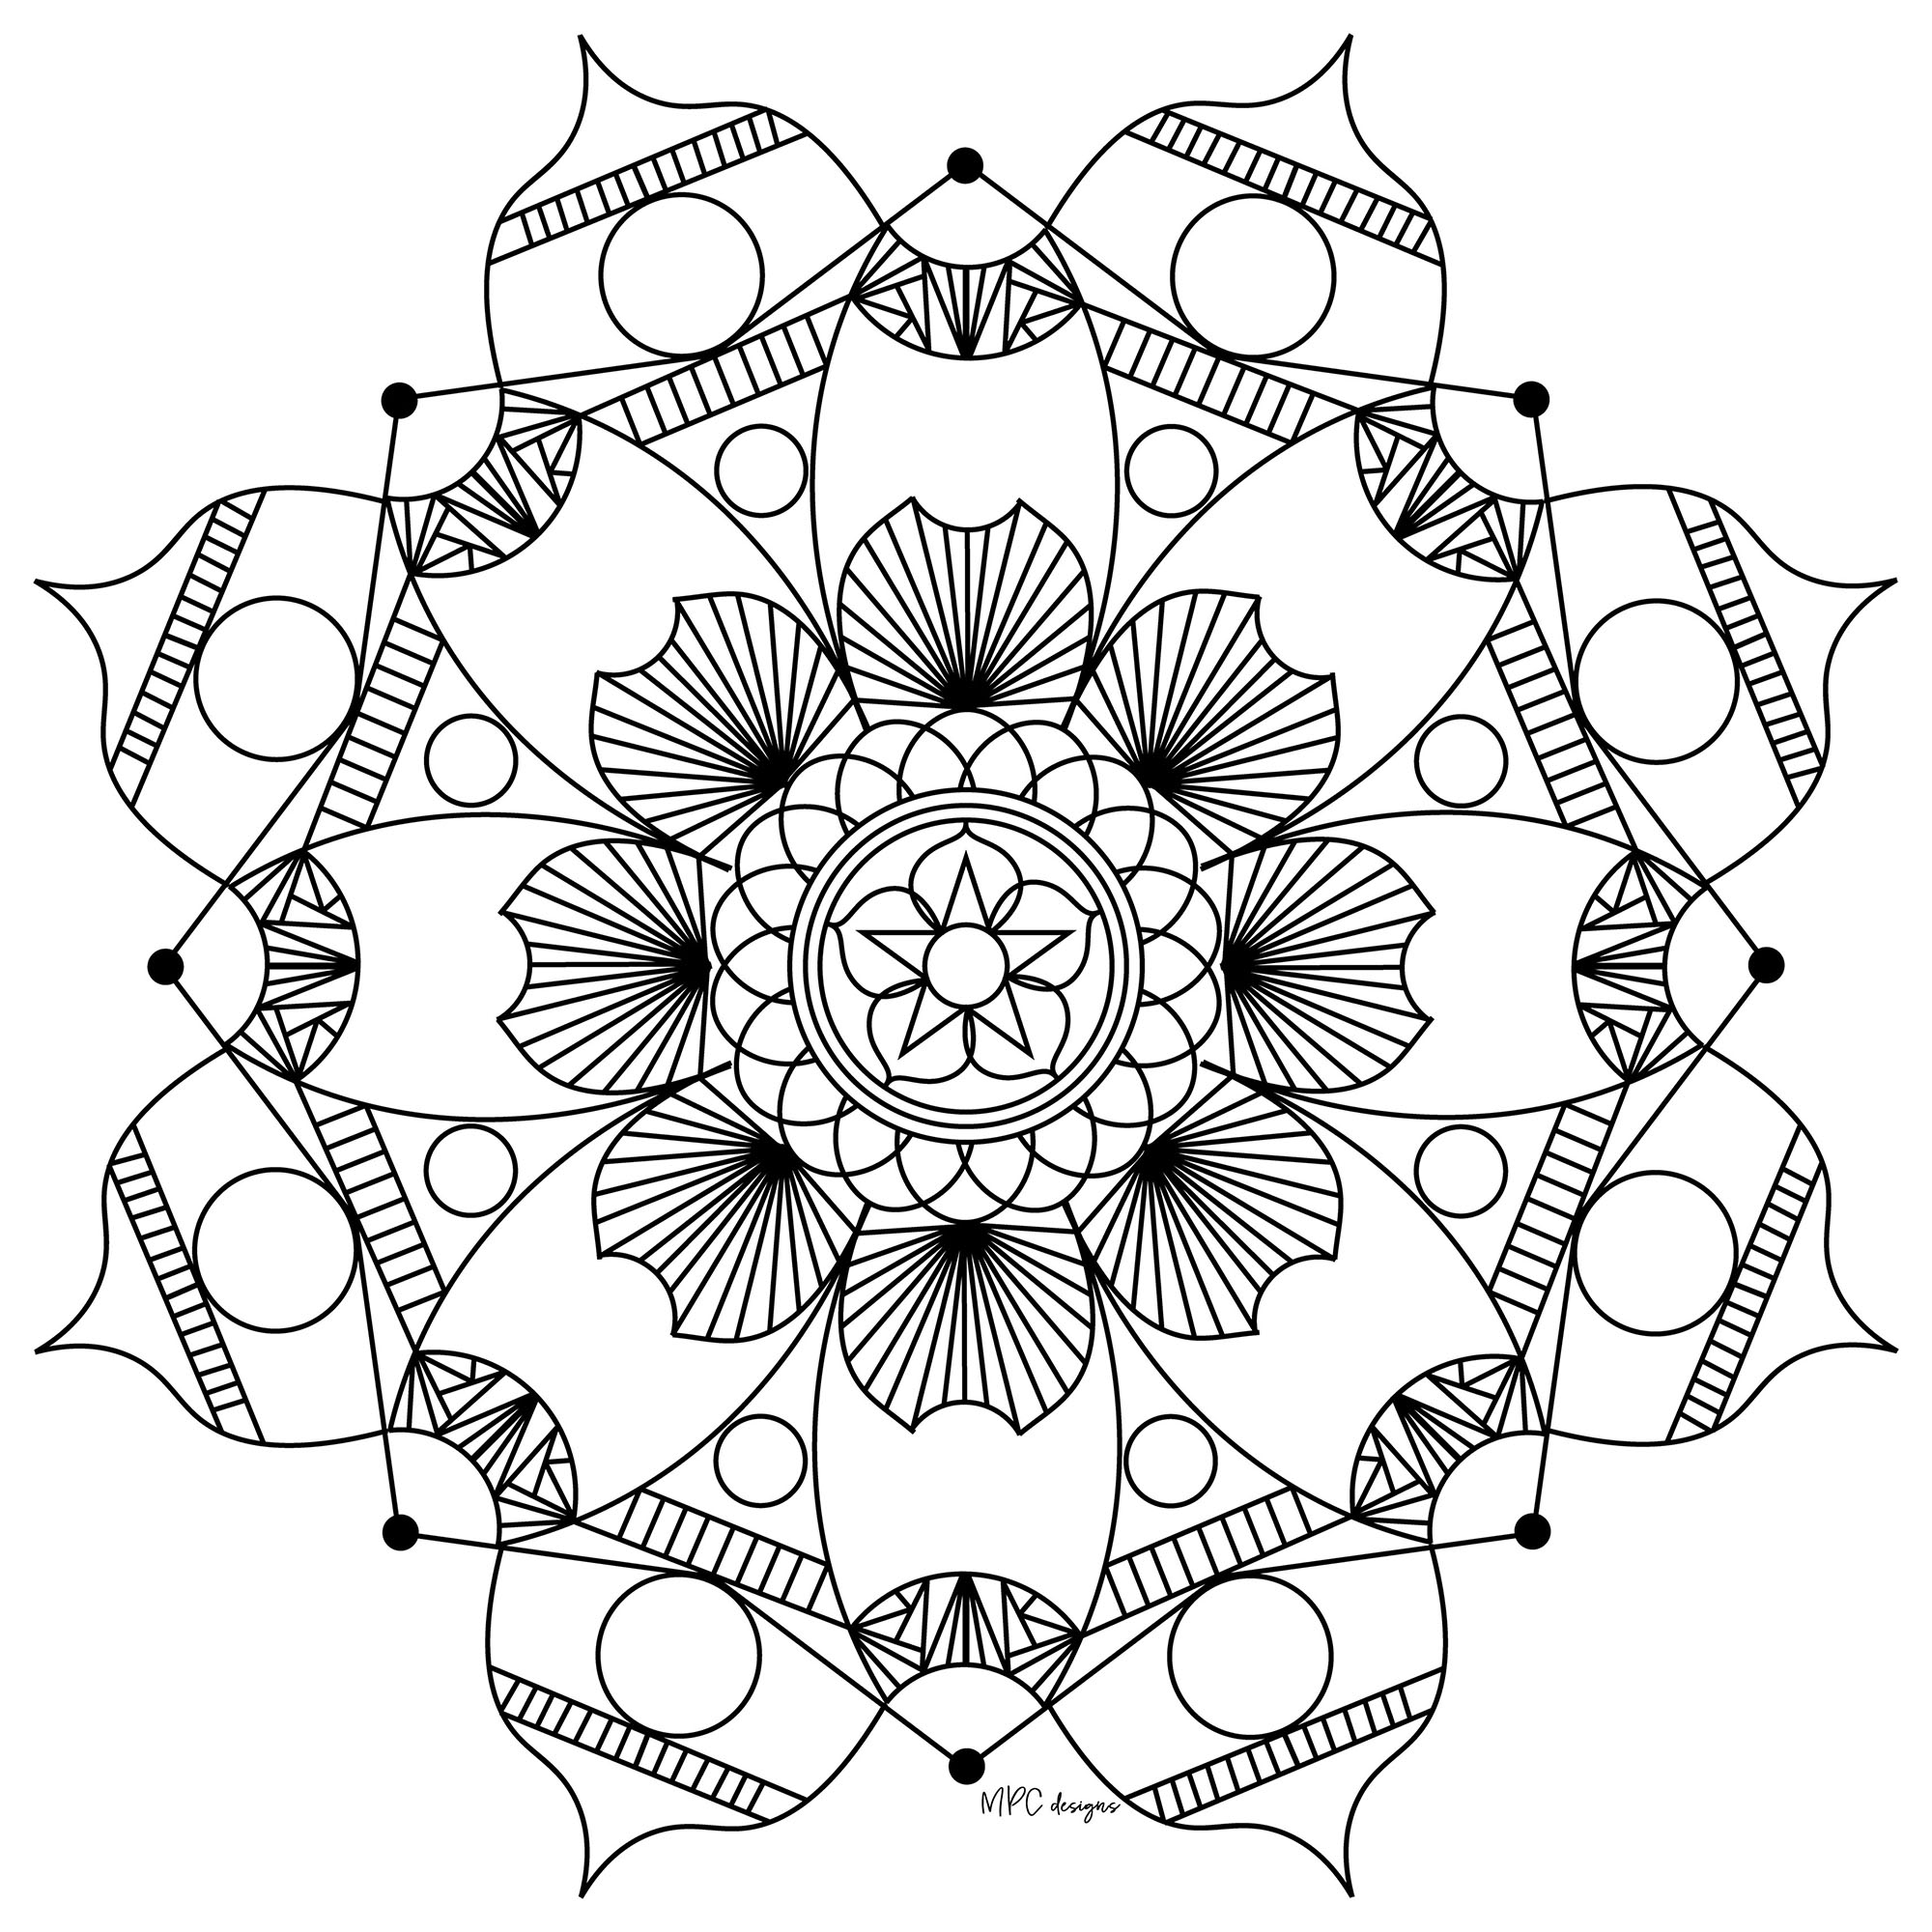 When coloring really becomes Art Therapy ... This is the case with this Mandala very harmonious and delicate. You will quickly feel the benefits of coloring. Do whatever it takes to get rid of any distractions that may interfere with your coloring.